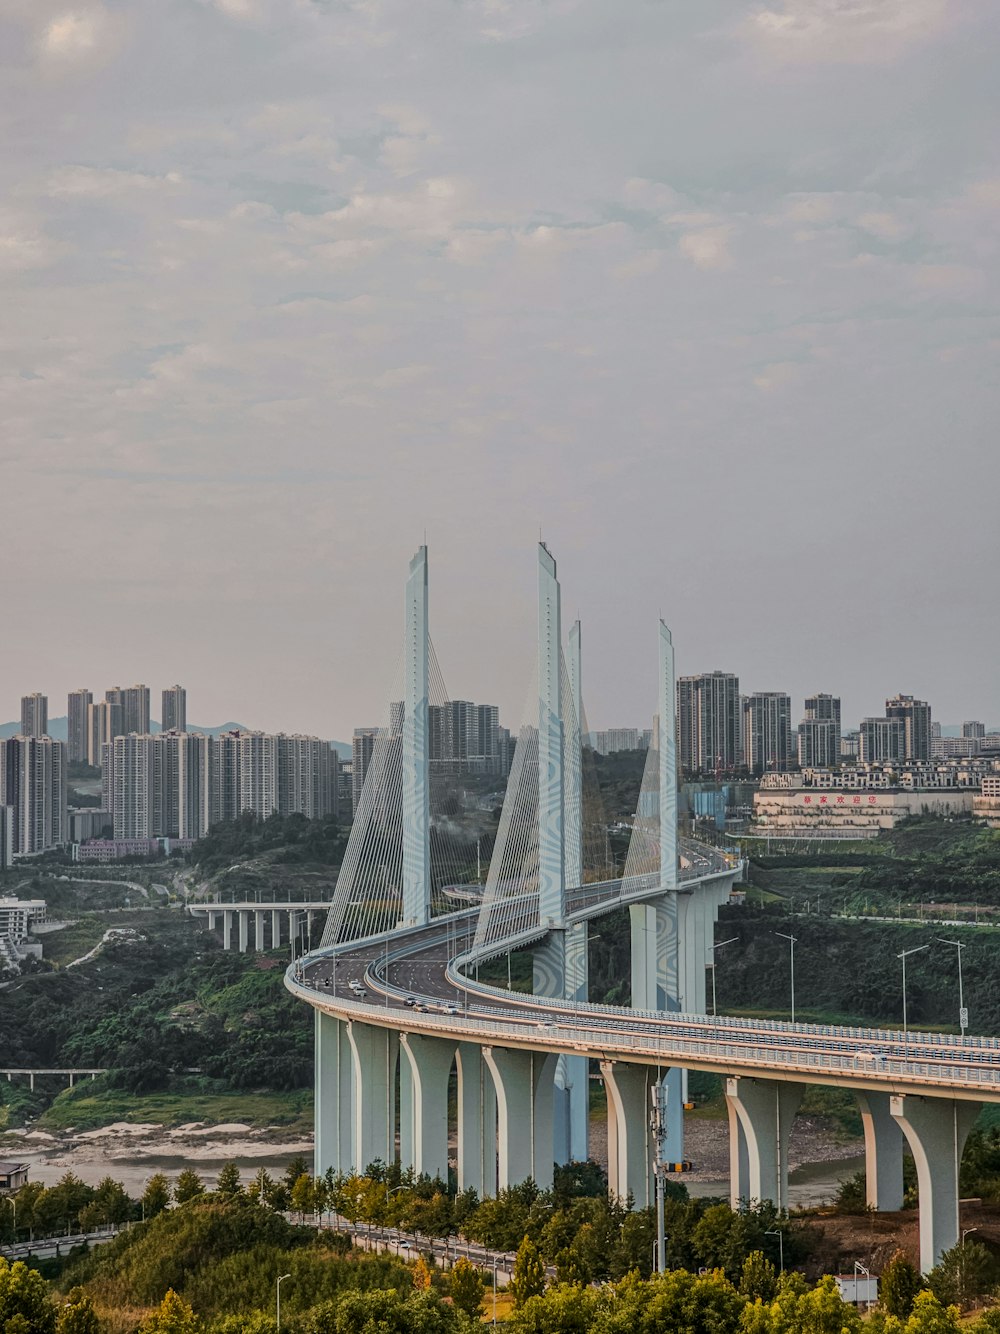 a view of a bridge with a city in the background